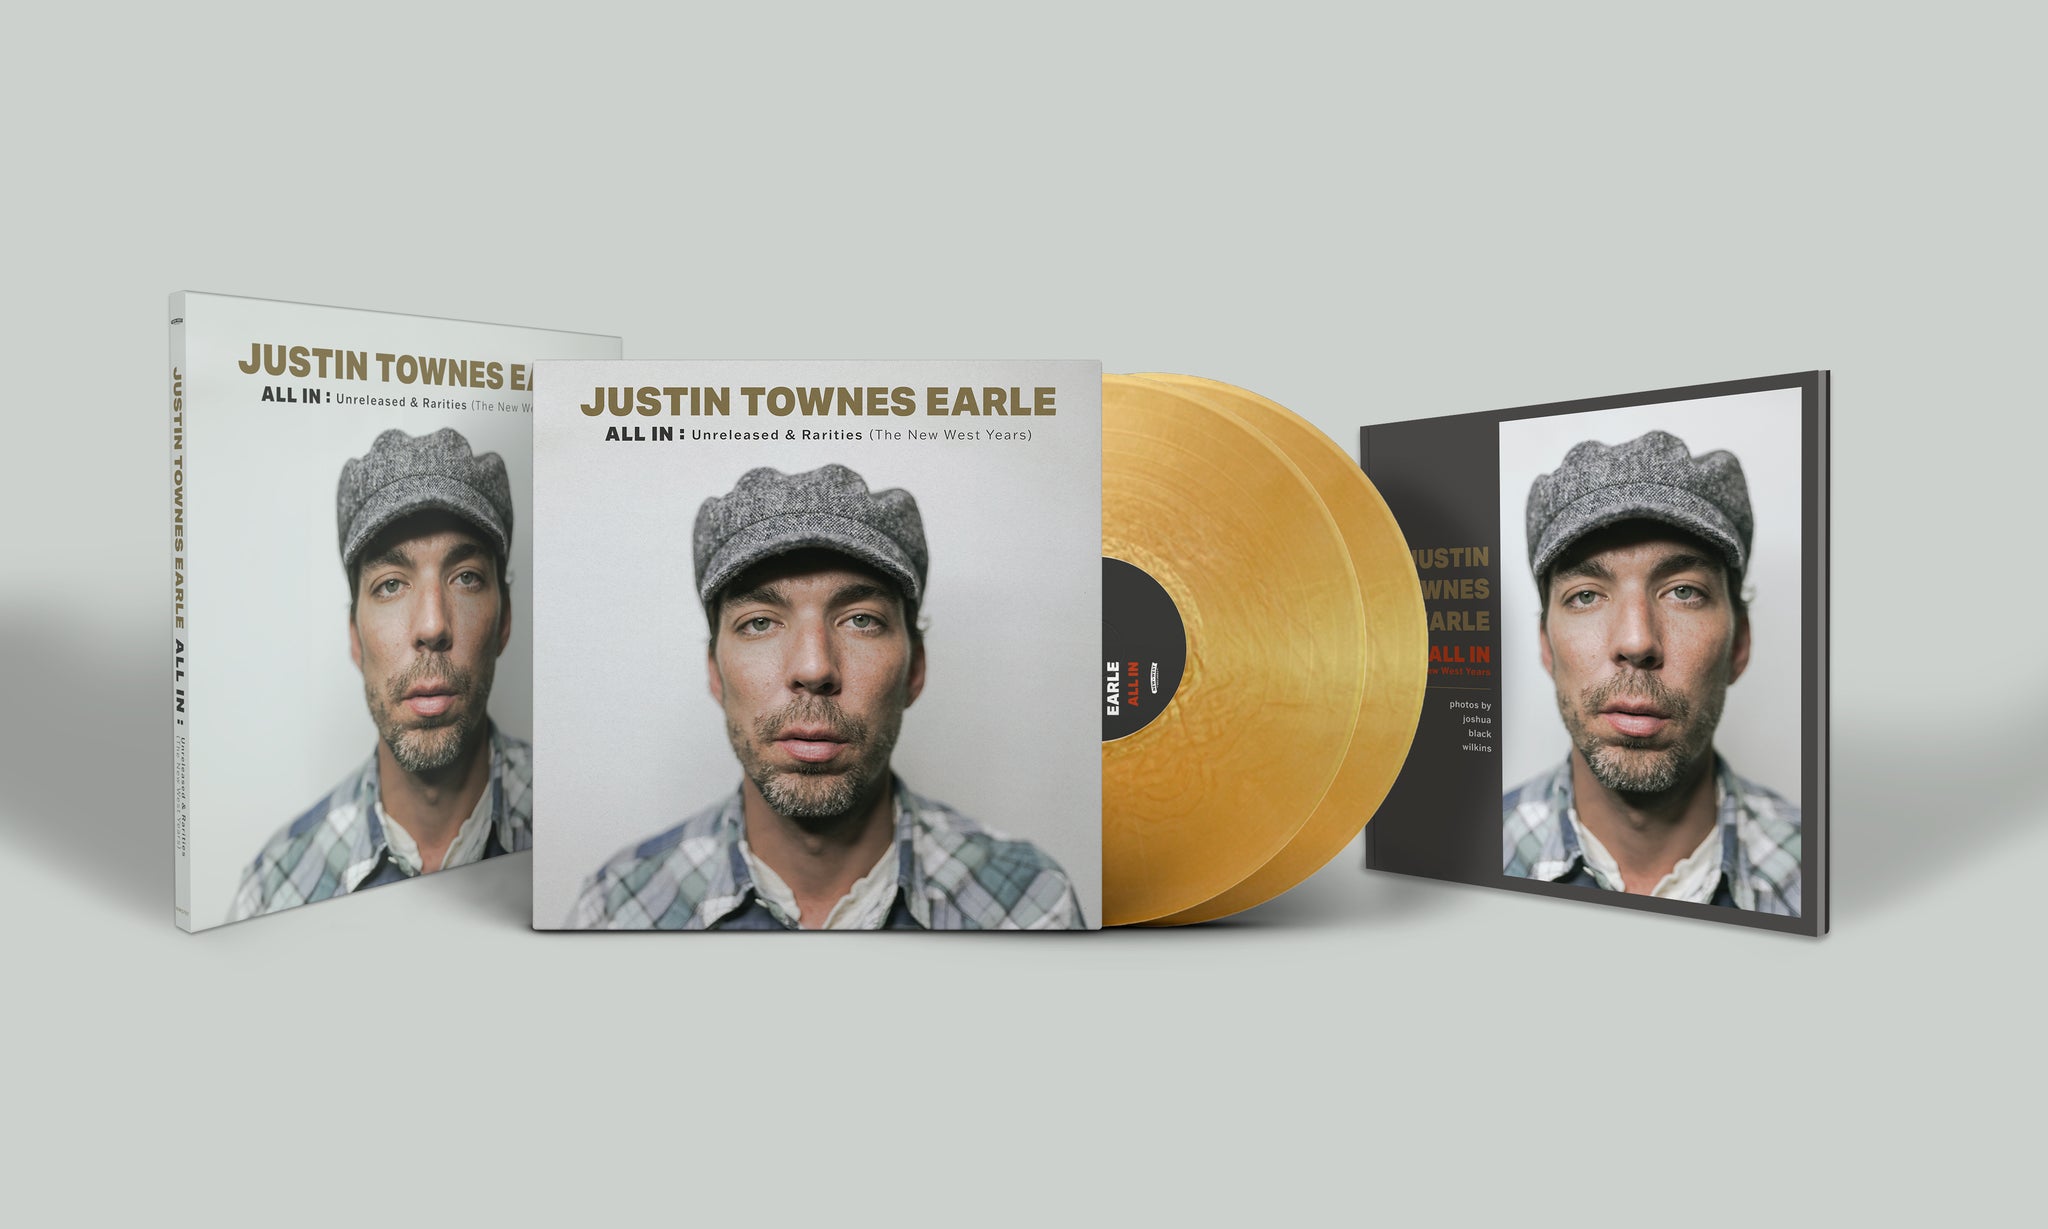 Justin Townes Earle - ALL IN: Unreleased & Rarities (The New West Years) [Collector's Edition Color Vinyl]